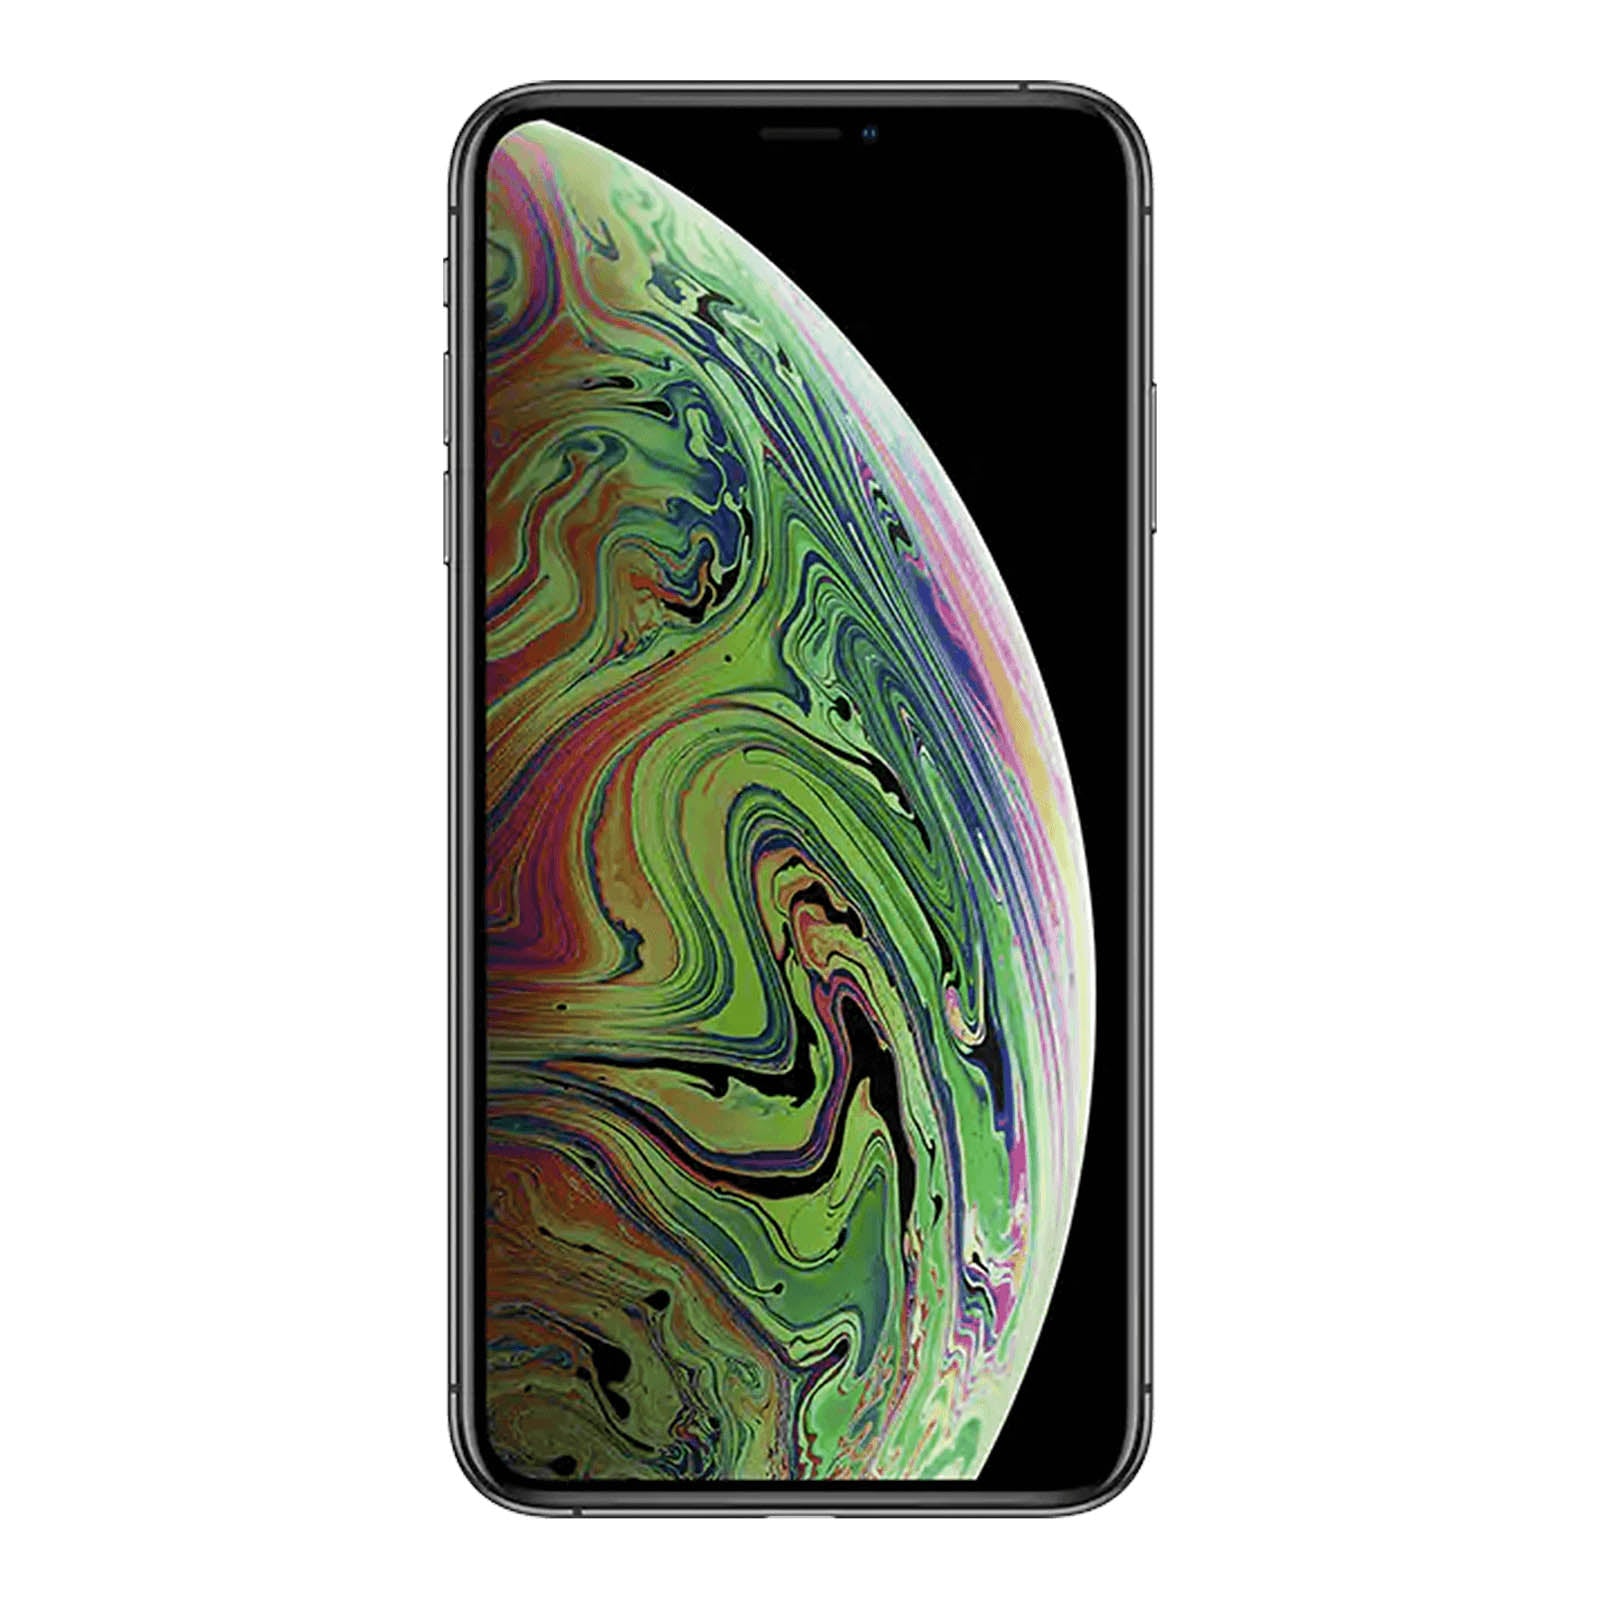 Apple iPhone XS Max 512GB Space Grey Fair - T-Mobile